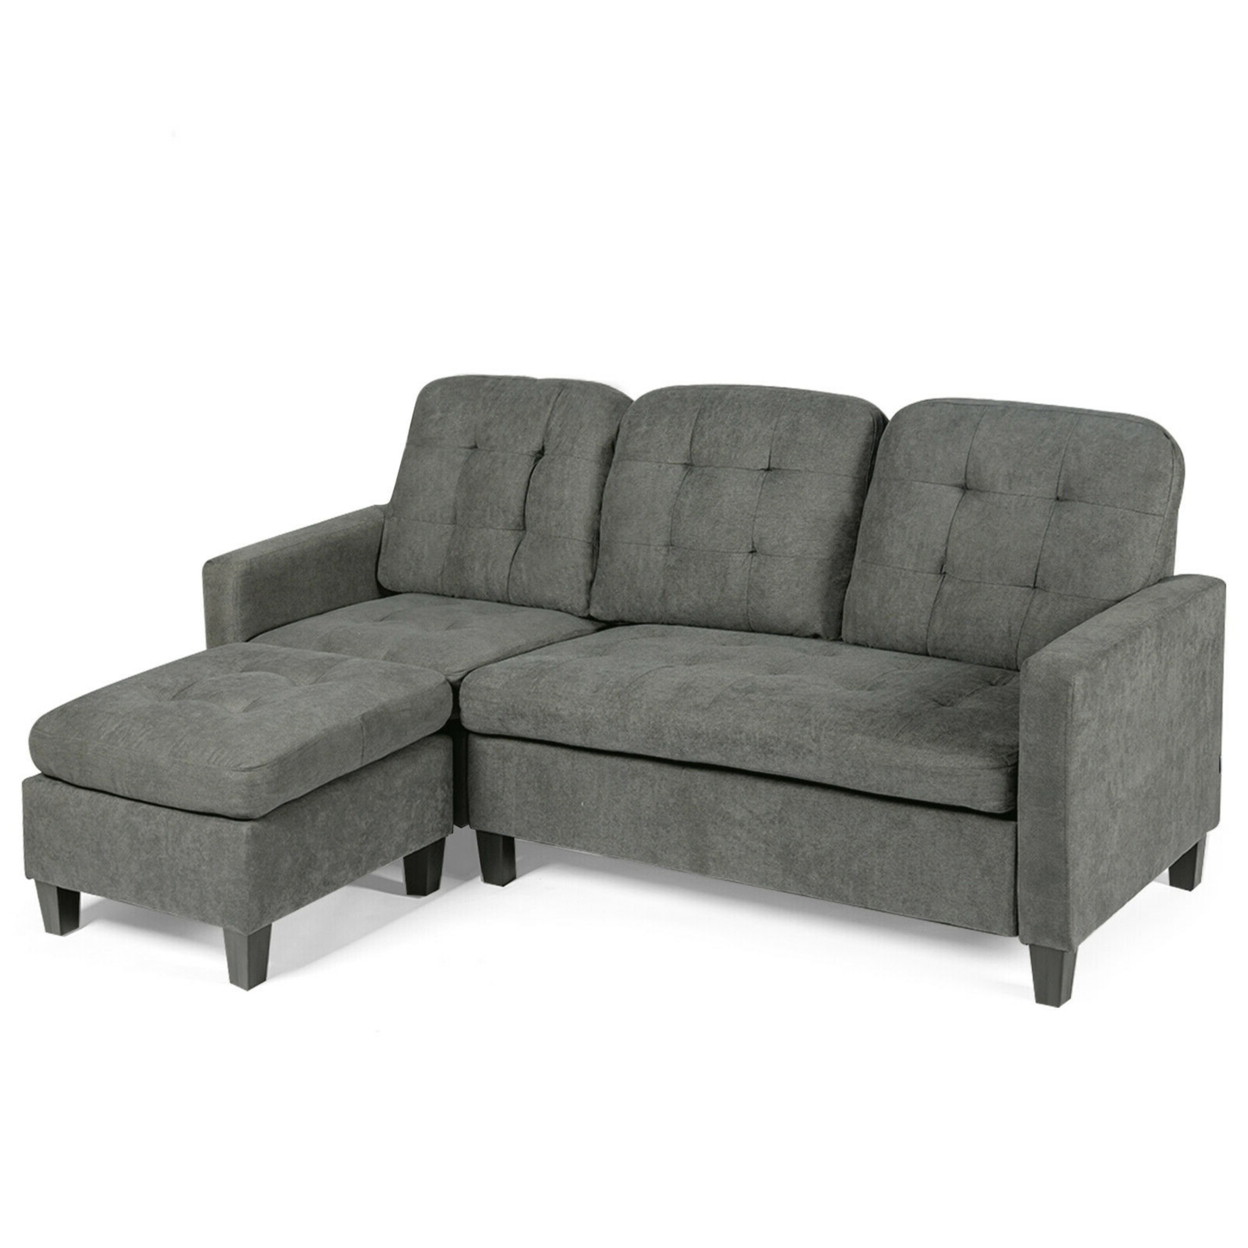 Convertible Sectional Sofa Set L-shaped Sofa Couch W/ Reversible Ottoman - Grey